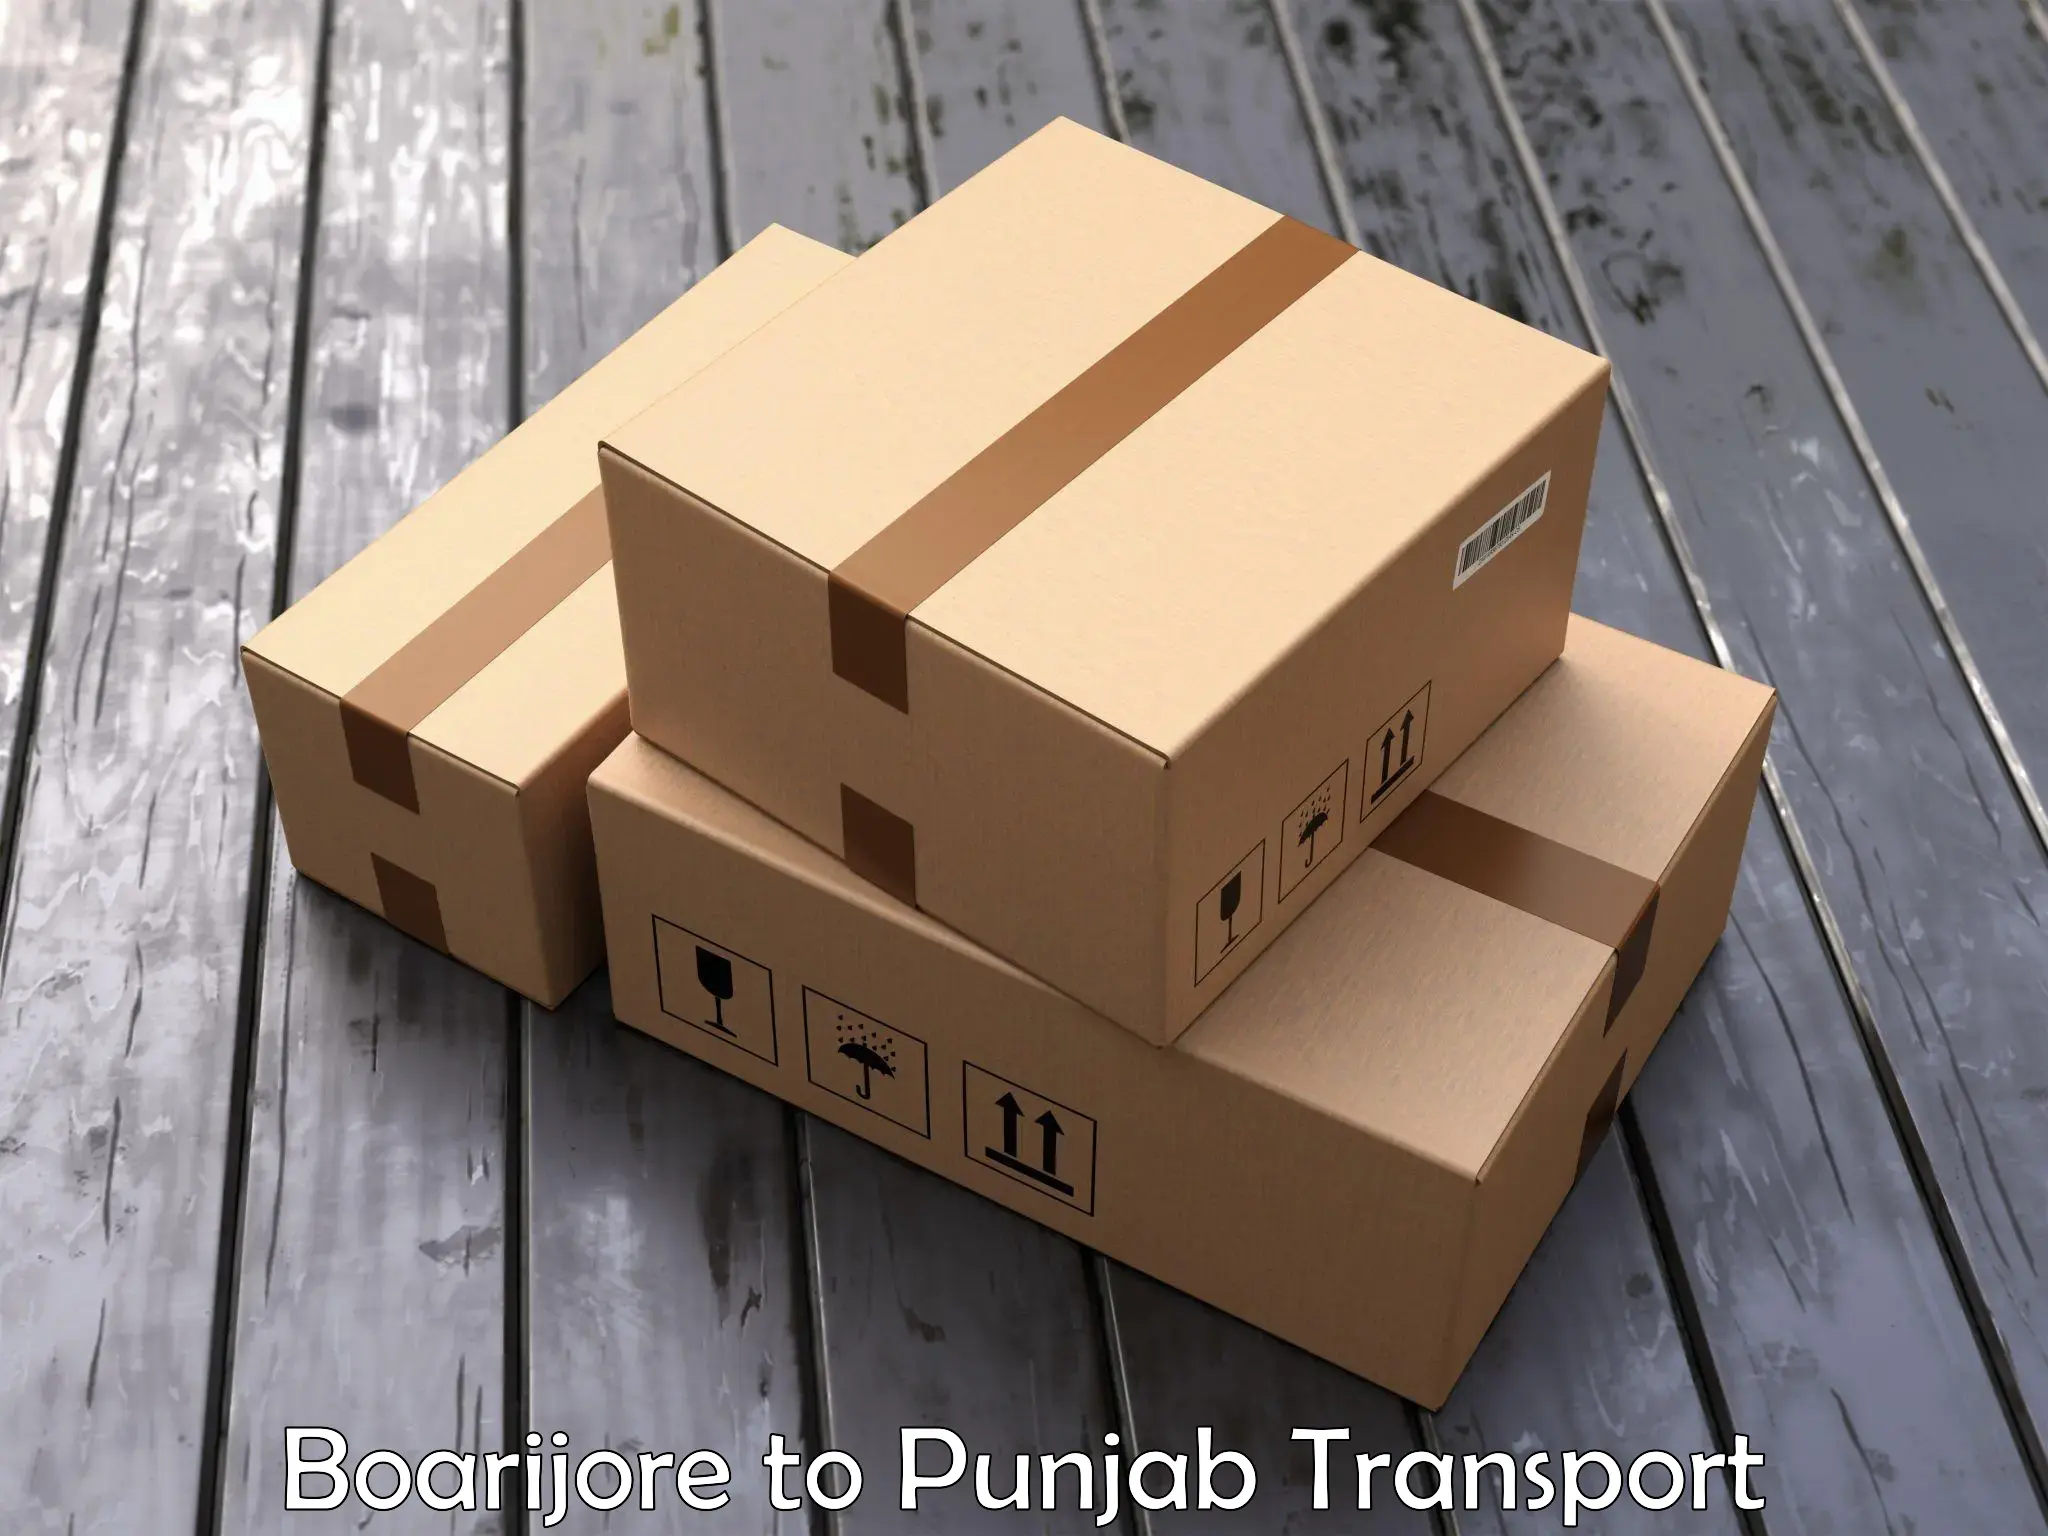 Goods transport services Boarijore to Mohali